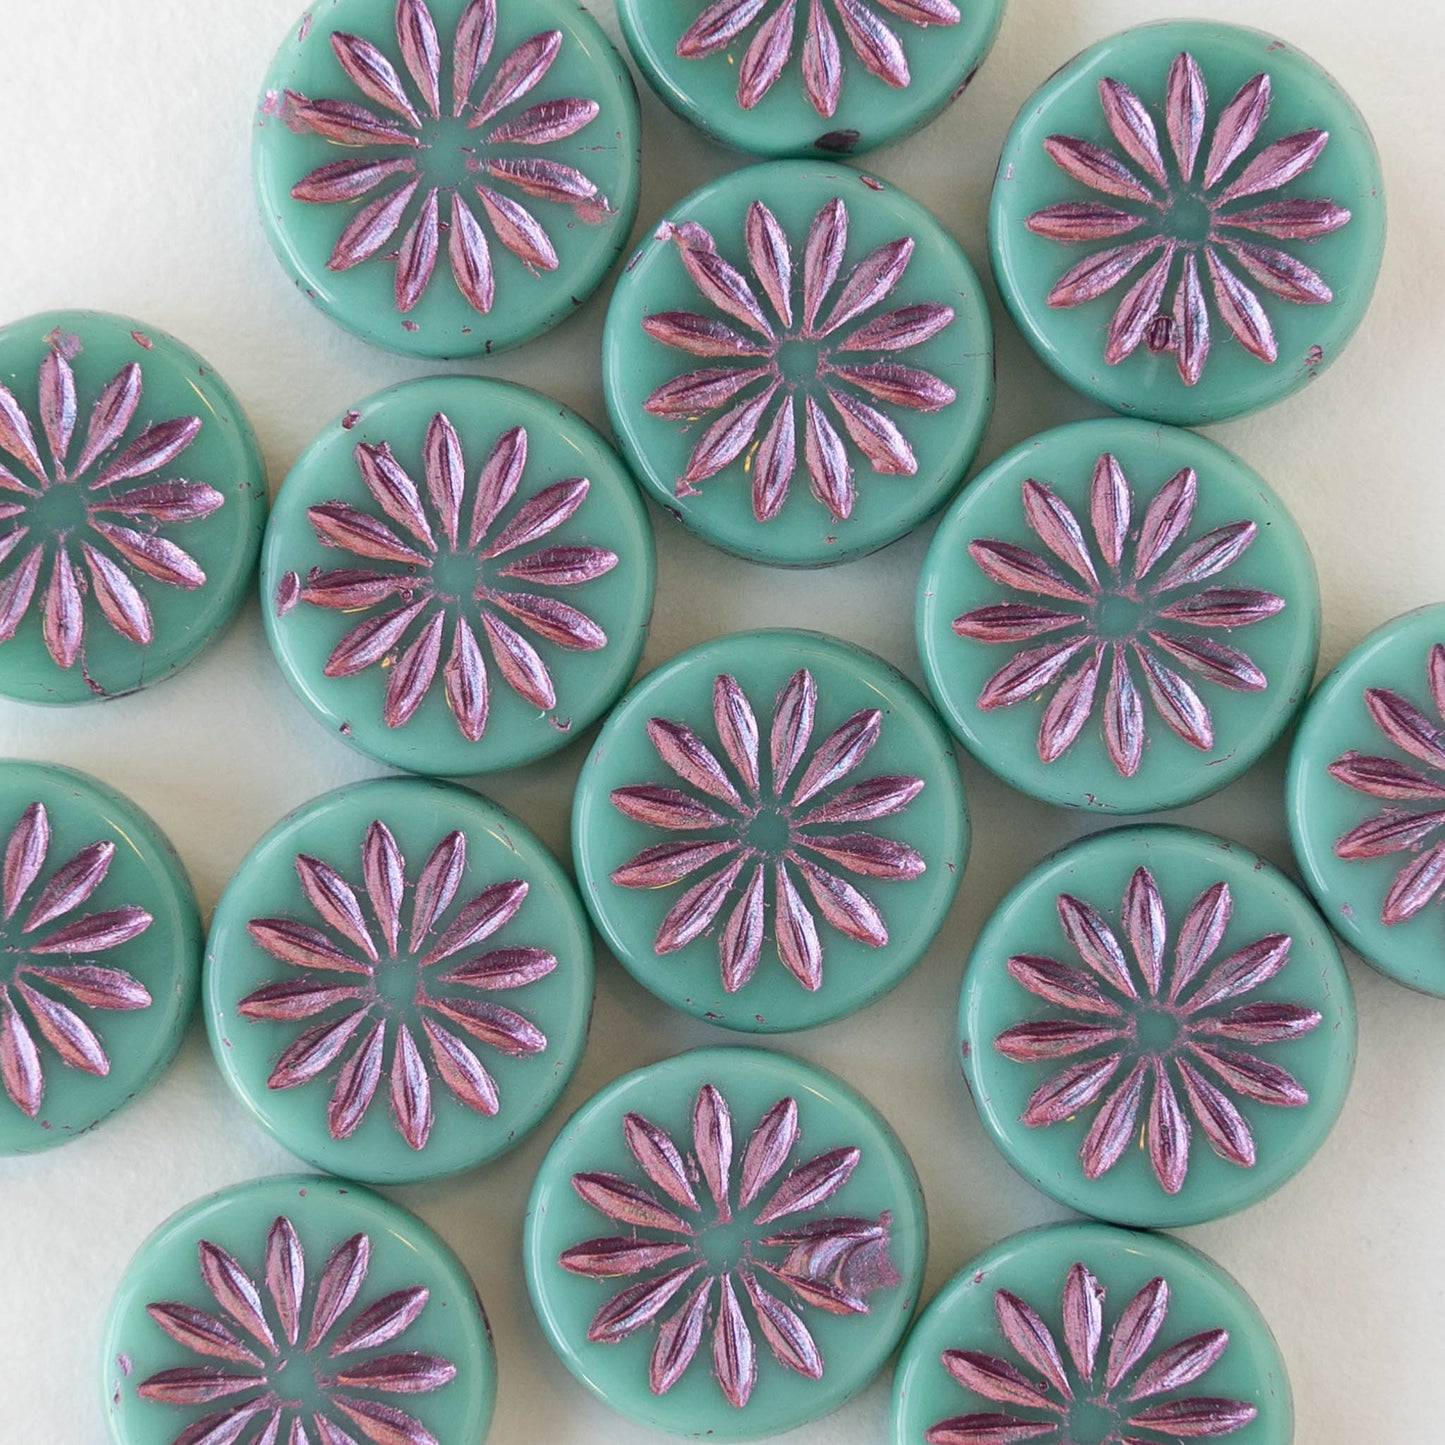 12mm Sun Coin Beads - Opaque Turquoise with Metallic Pink Wash - 6 Beads